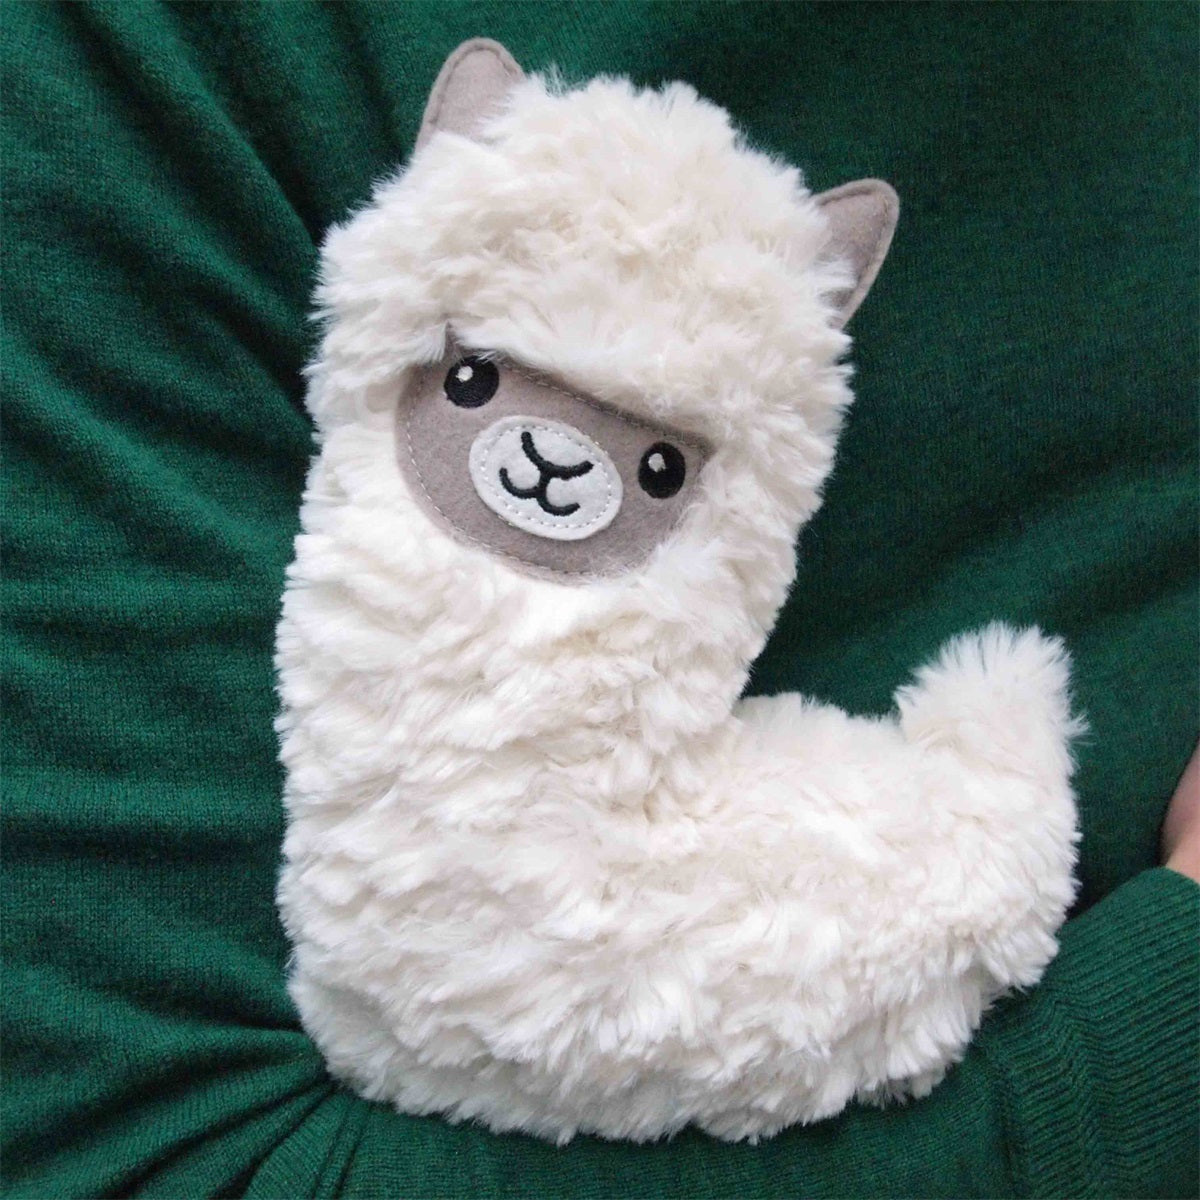 Fluffy Lama hot water bottle to cuddle